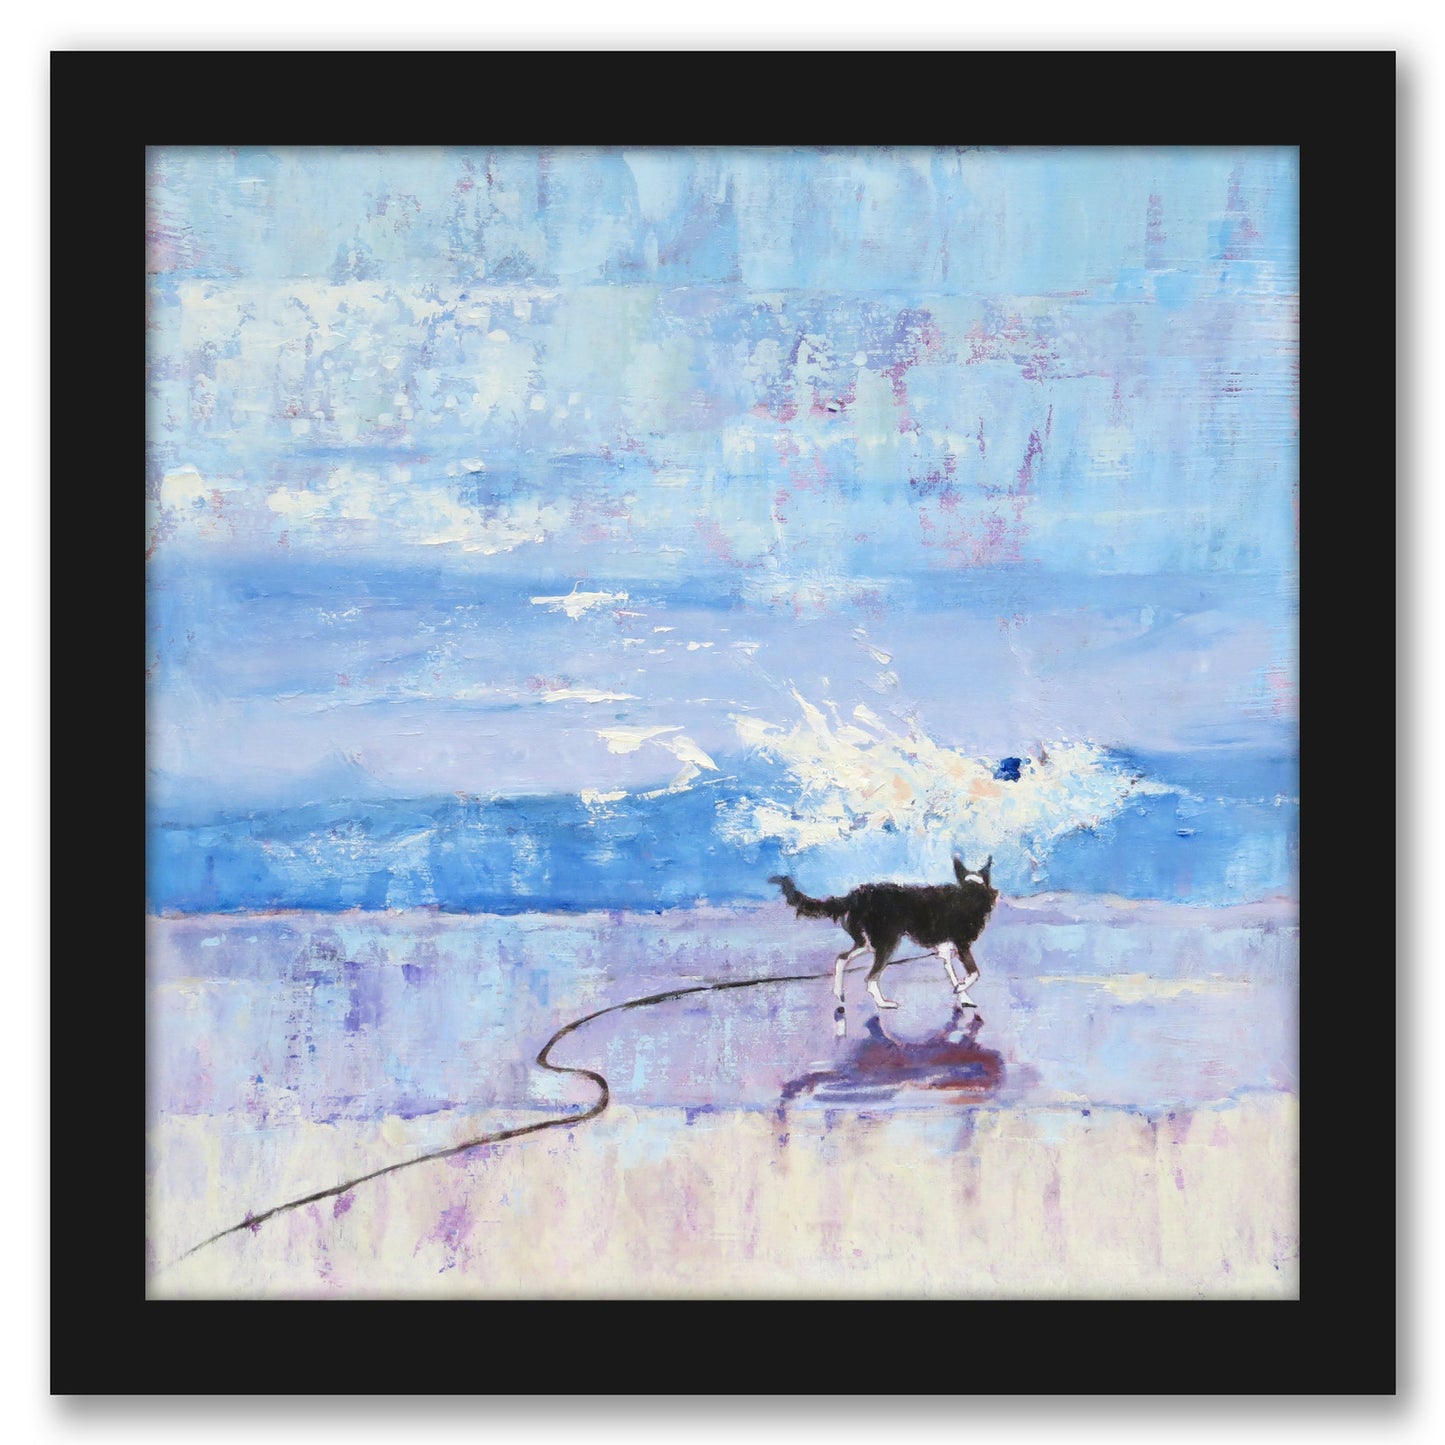 Grace The Border Collie Encounters A Wave No 3 by Mary Kemp - Framed Printd Print